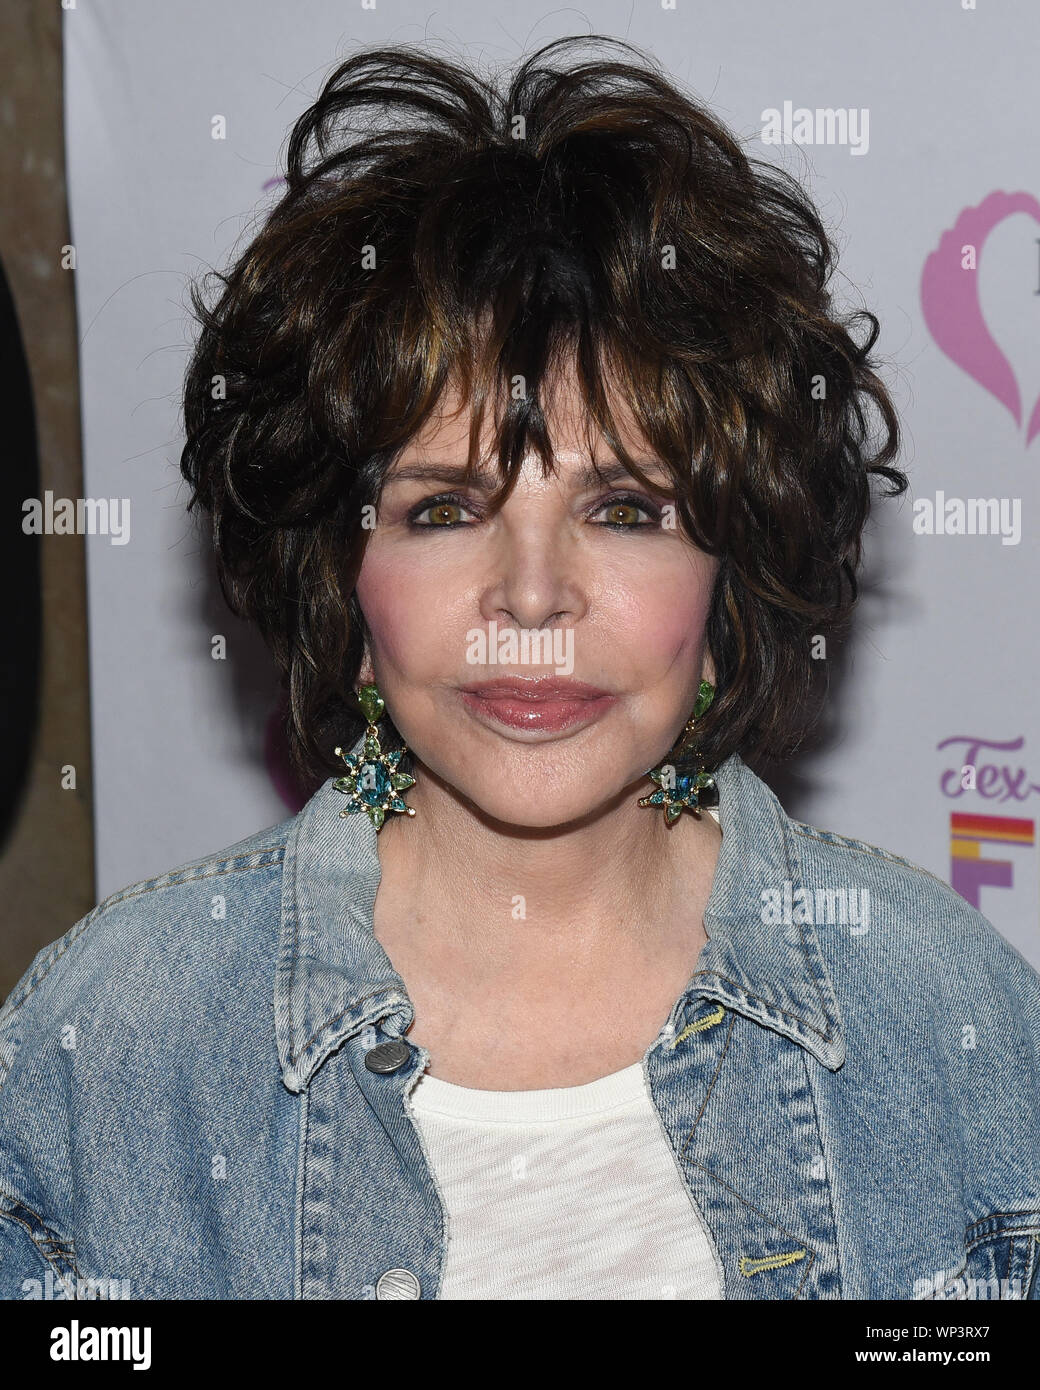 Carole Bayer Sager High Resolution Stock Photography and Images - Alamy